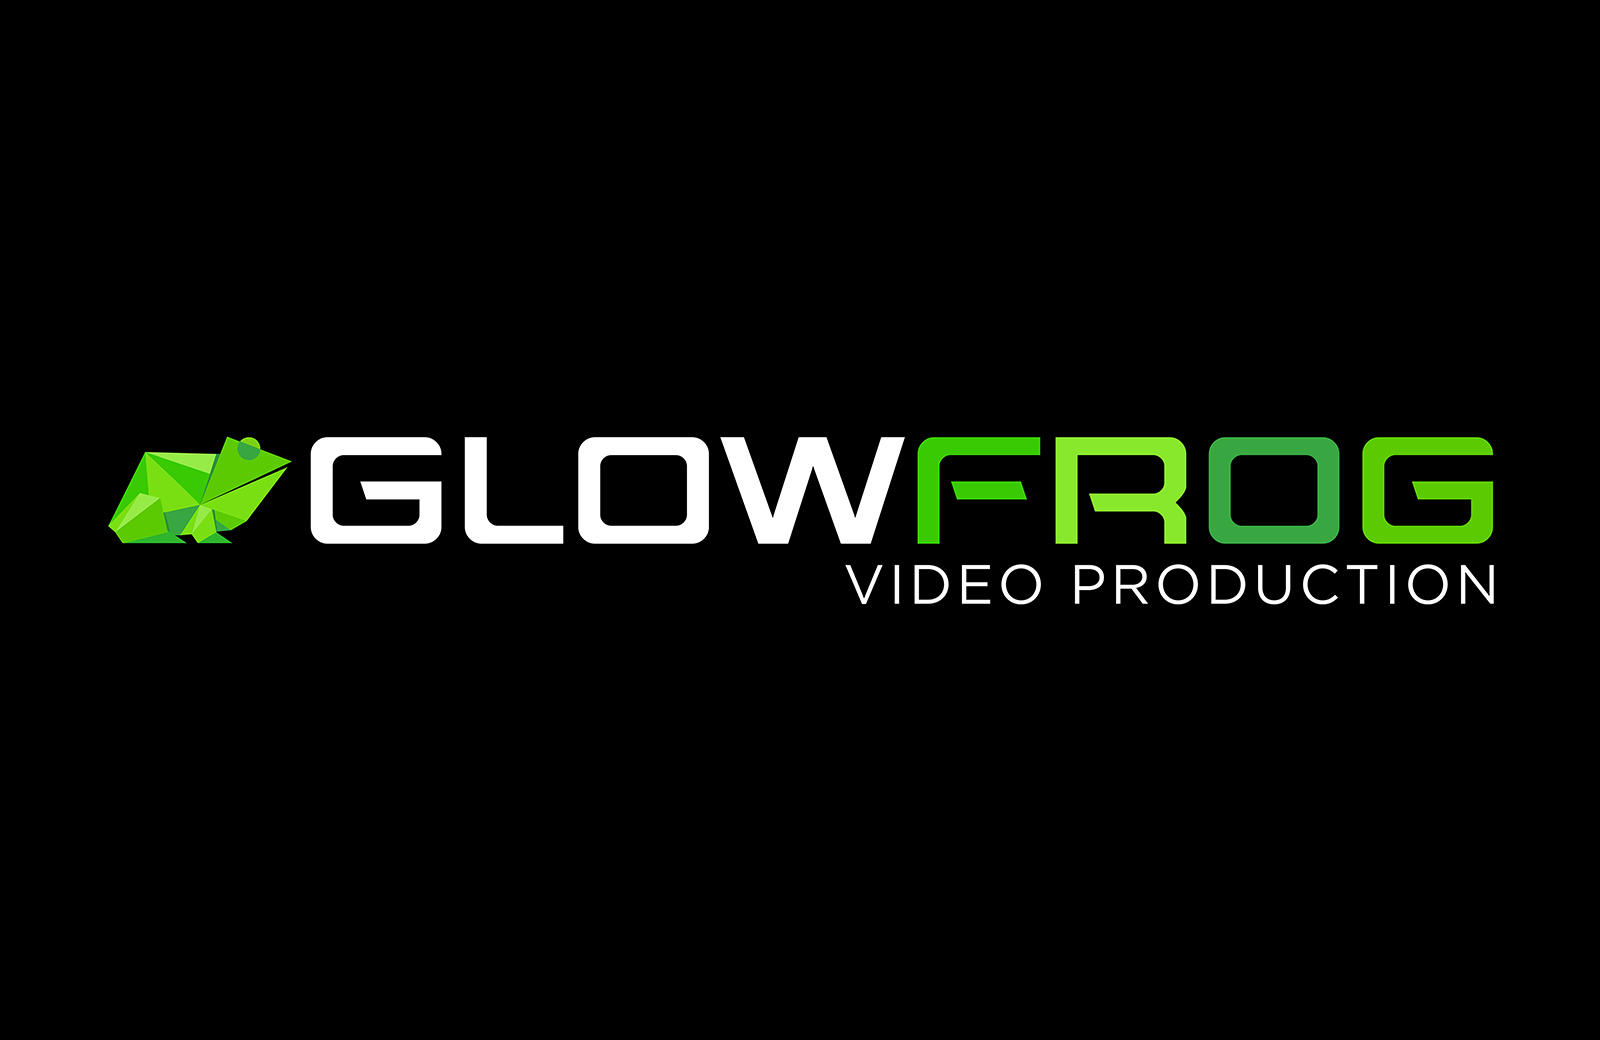 Glowfrog Video Production Wins Excellence Award for 4th Year Running